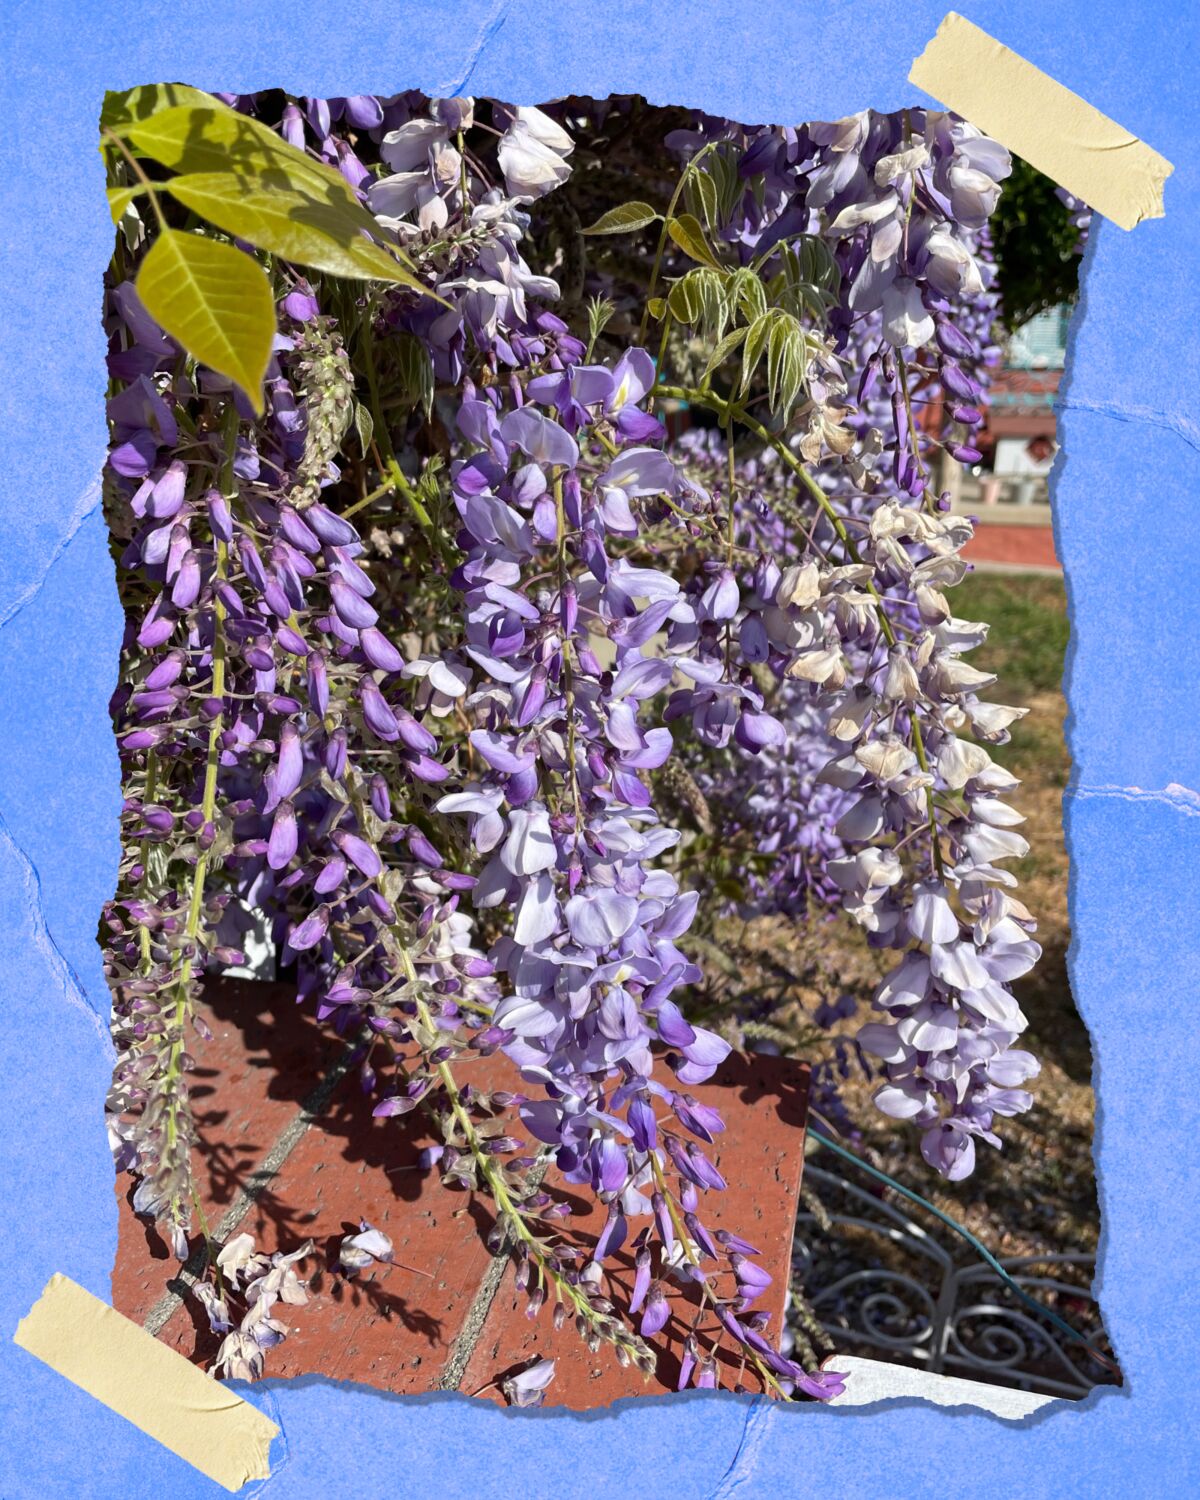 Look for wisteria blooming in home gardens around L.A.